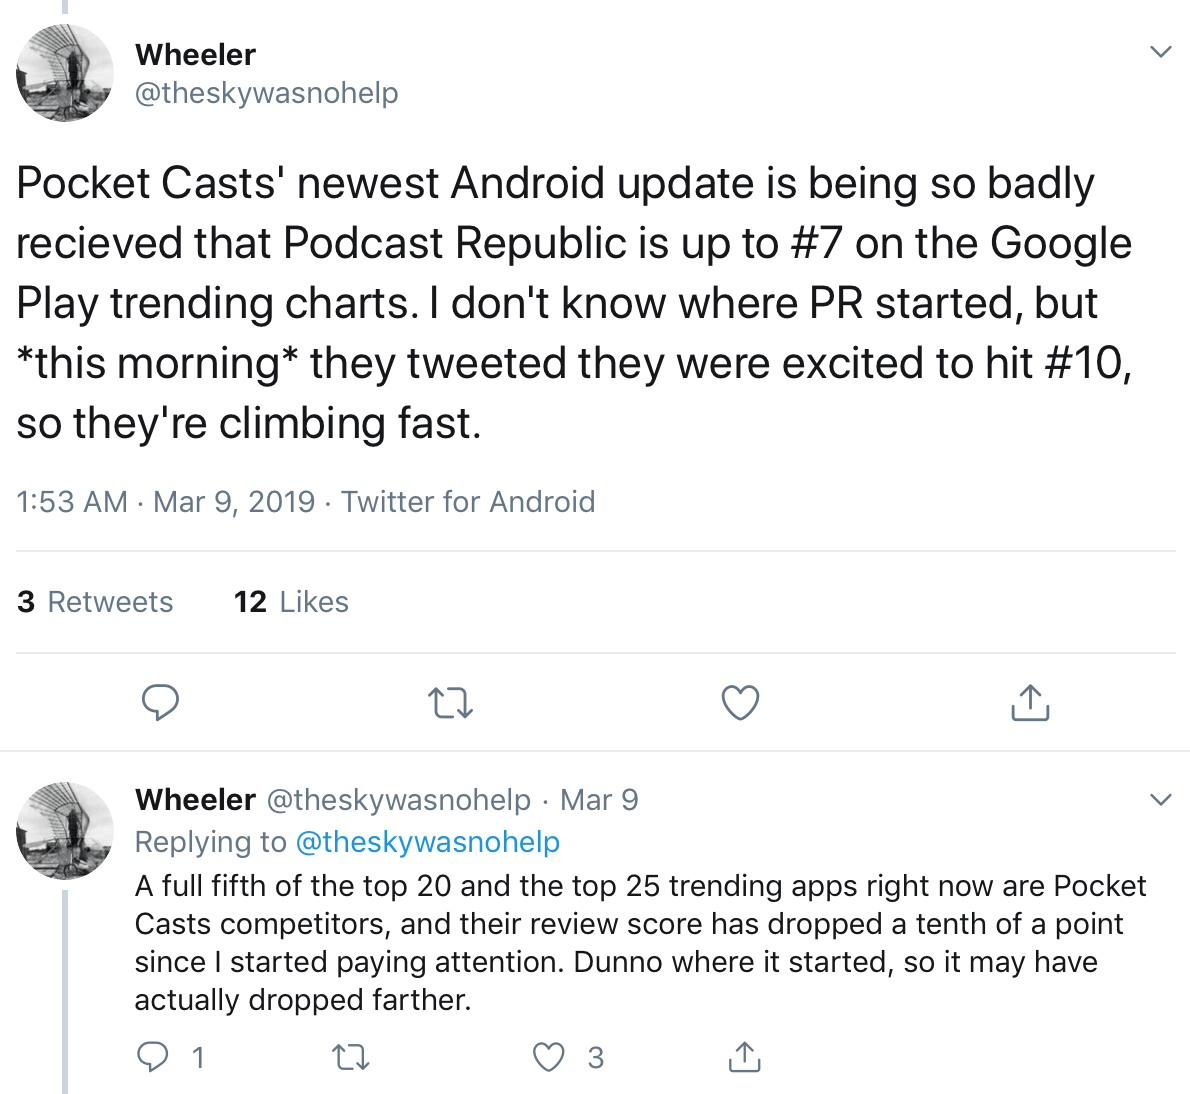 @theskywasnohelp tweeting about the latest Pocket Casts Android update and the surge in popularity for Podcast Republic.